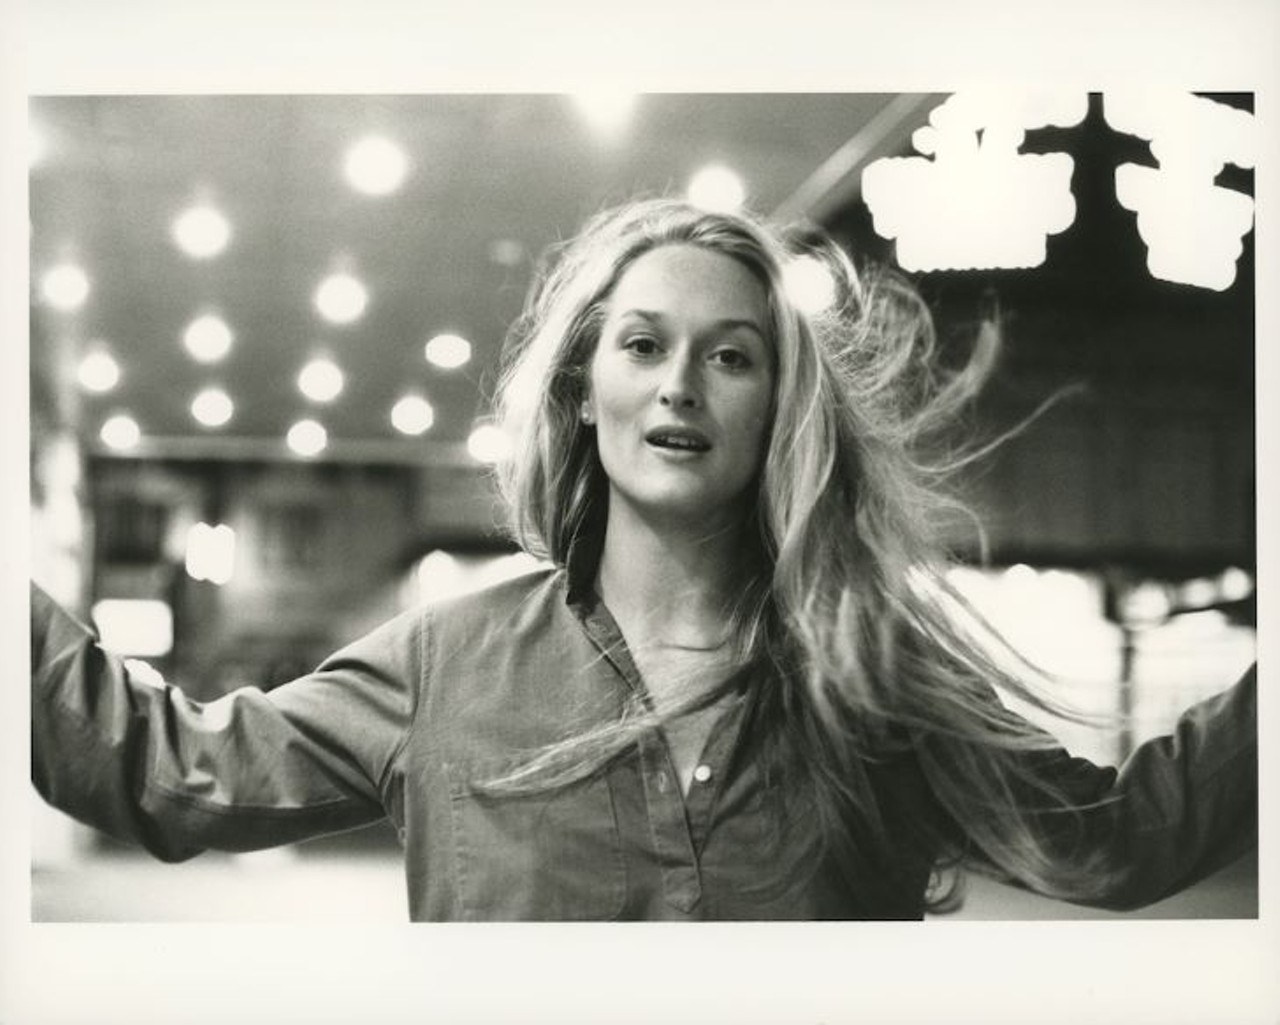 Opening Friday, Feb. 8Duane Michals: The Portraitist at Snap SpacePhoto of Meryl Streep by Duane Michals